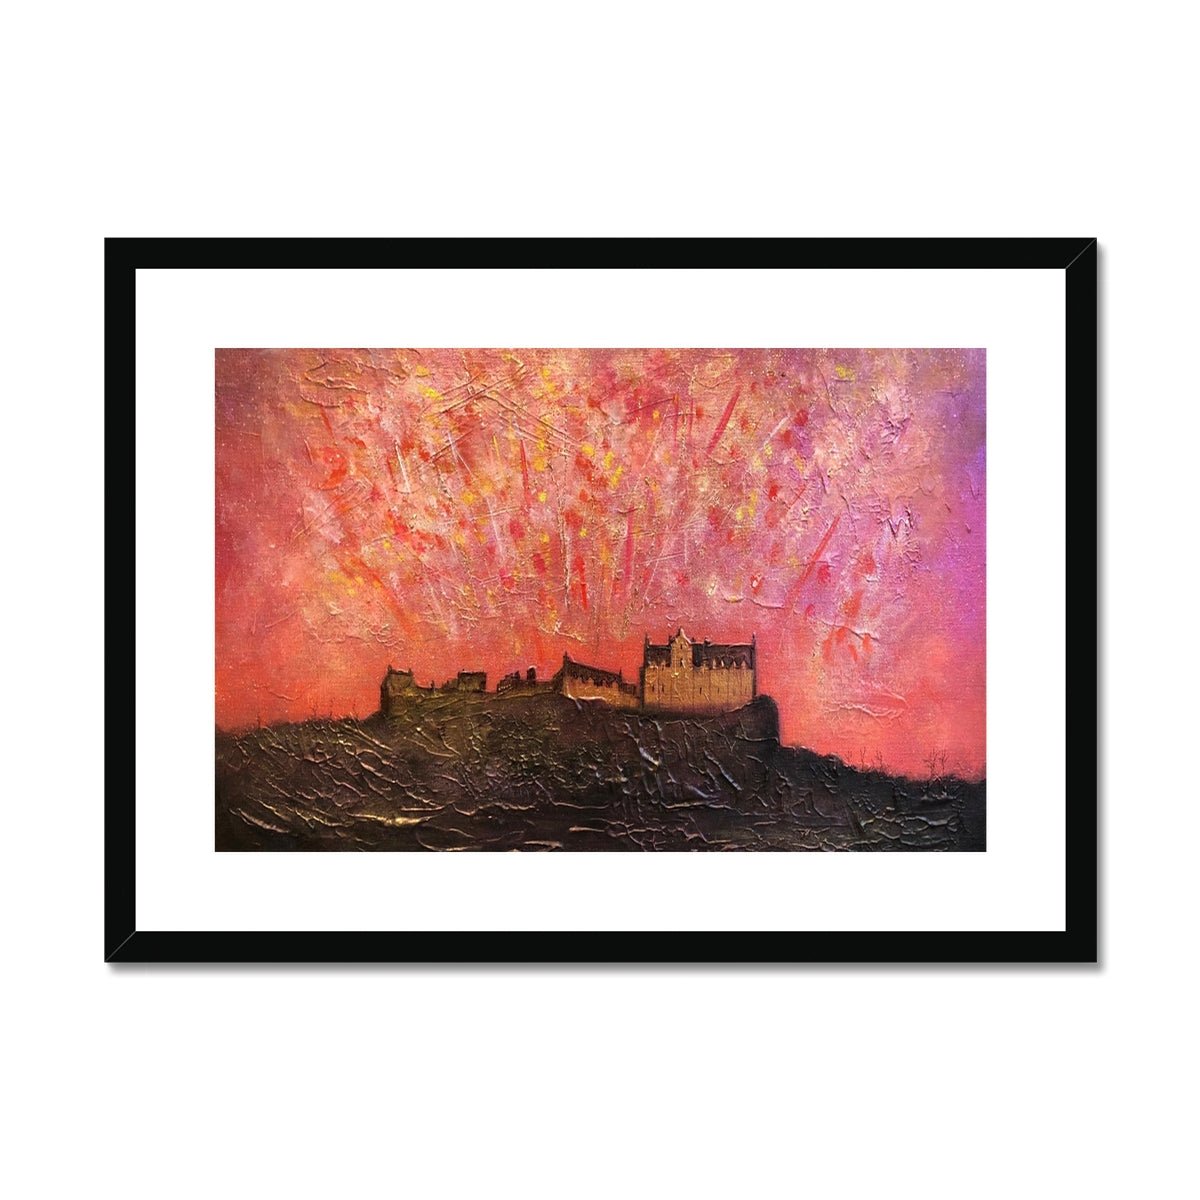 Edinburgh Castle Fireworks Painting | Framed & Mounted Prints From Scotland-Framed & Mounted Prints-Historic & Iconic Scotland Art Gallery-A2 Landscape-Black Frame-Paintings, Prints, Homeware, Art Gifts From Scotland By Scottish Artist Kevin Hunter